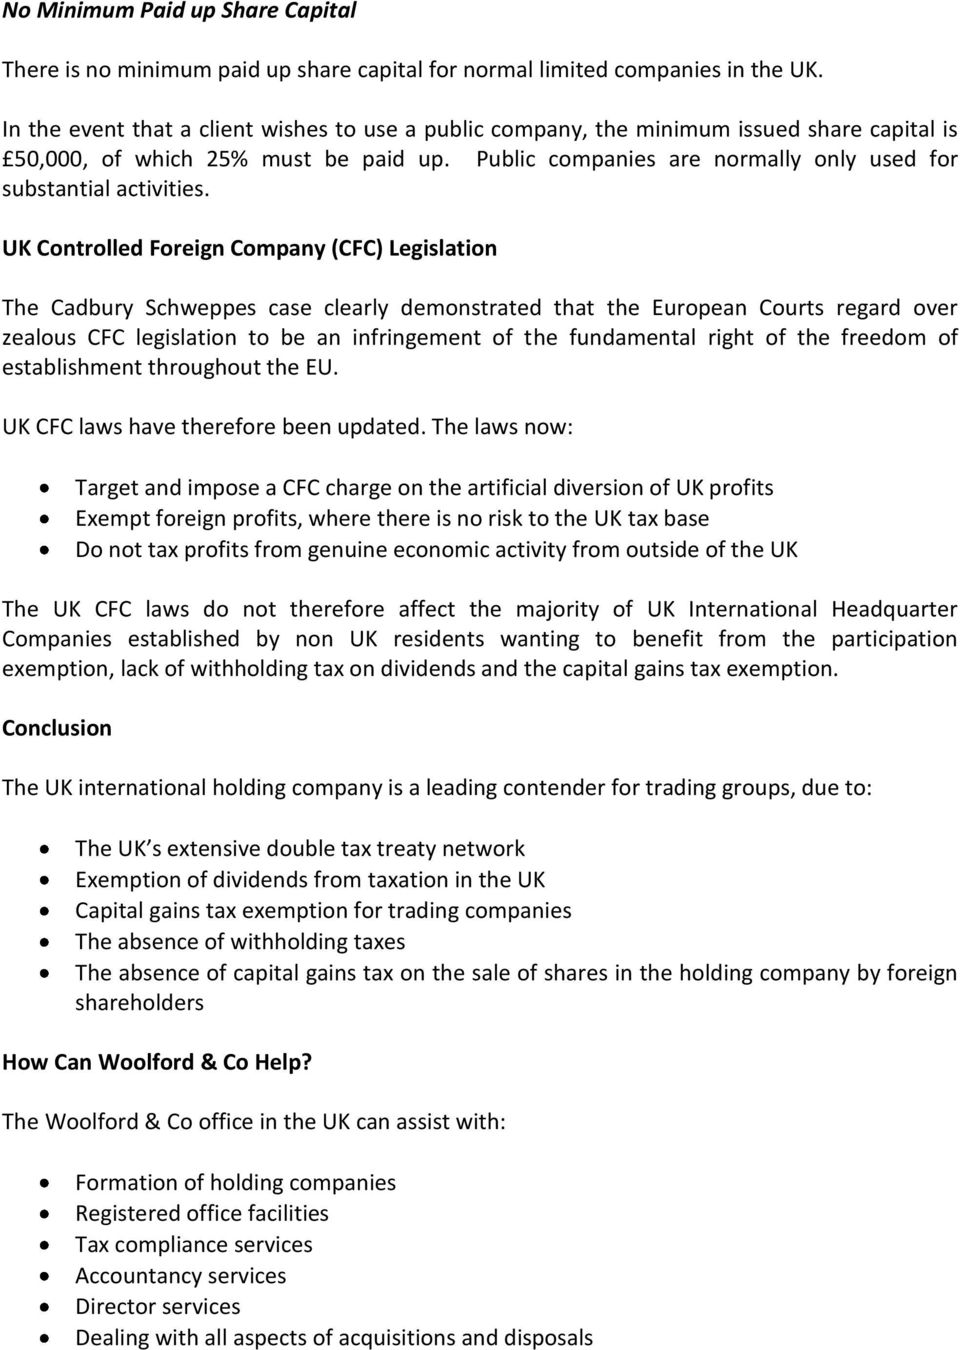 UK Controlled Foreign Company (CFC) Legislation The Cadbury Schweppes case clearly demonstrated that the European Courts regard over zealous CFC legislation to be an infringement of the fundamental